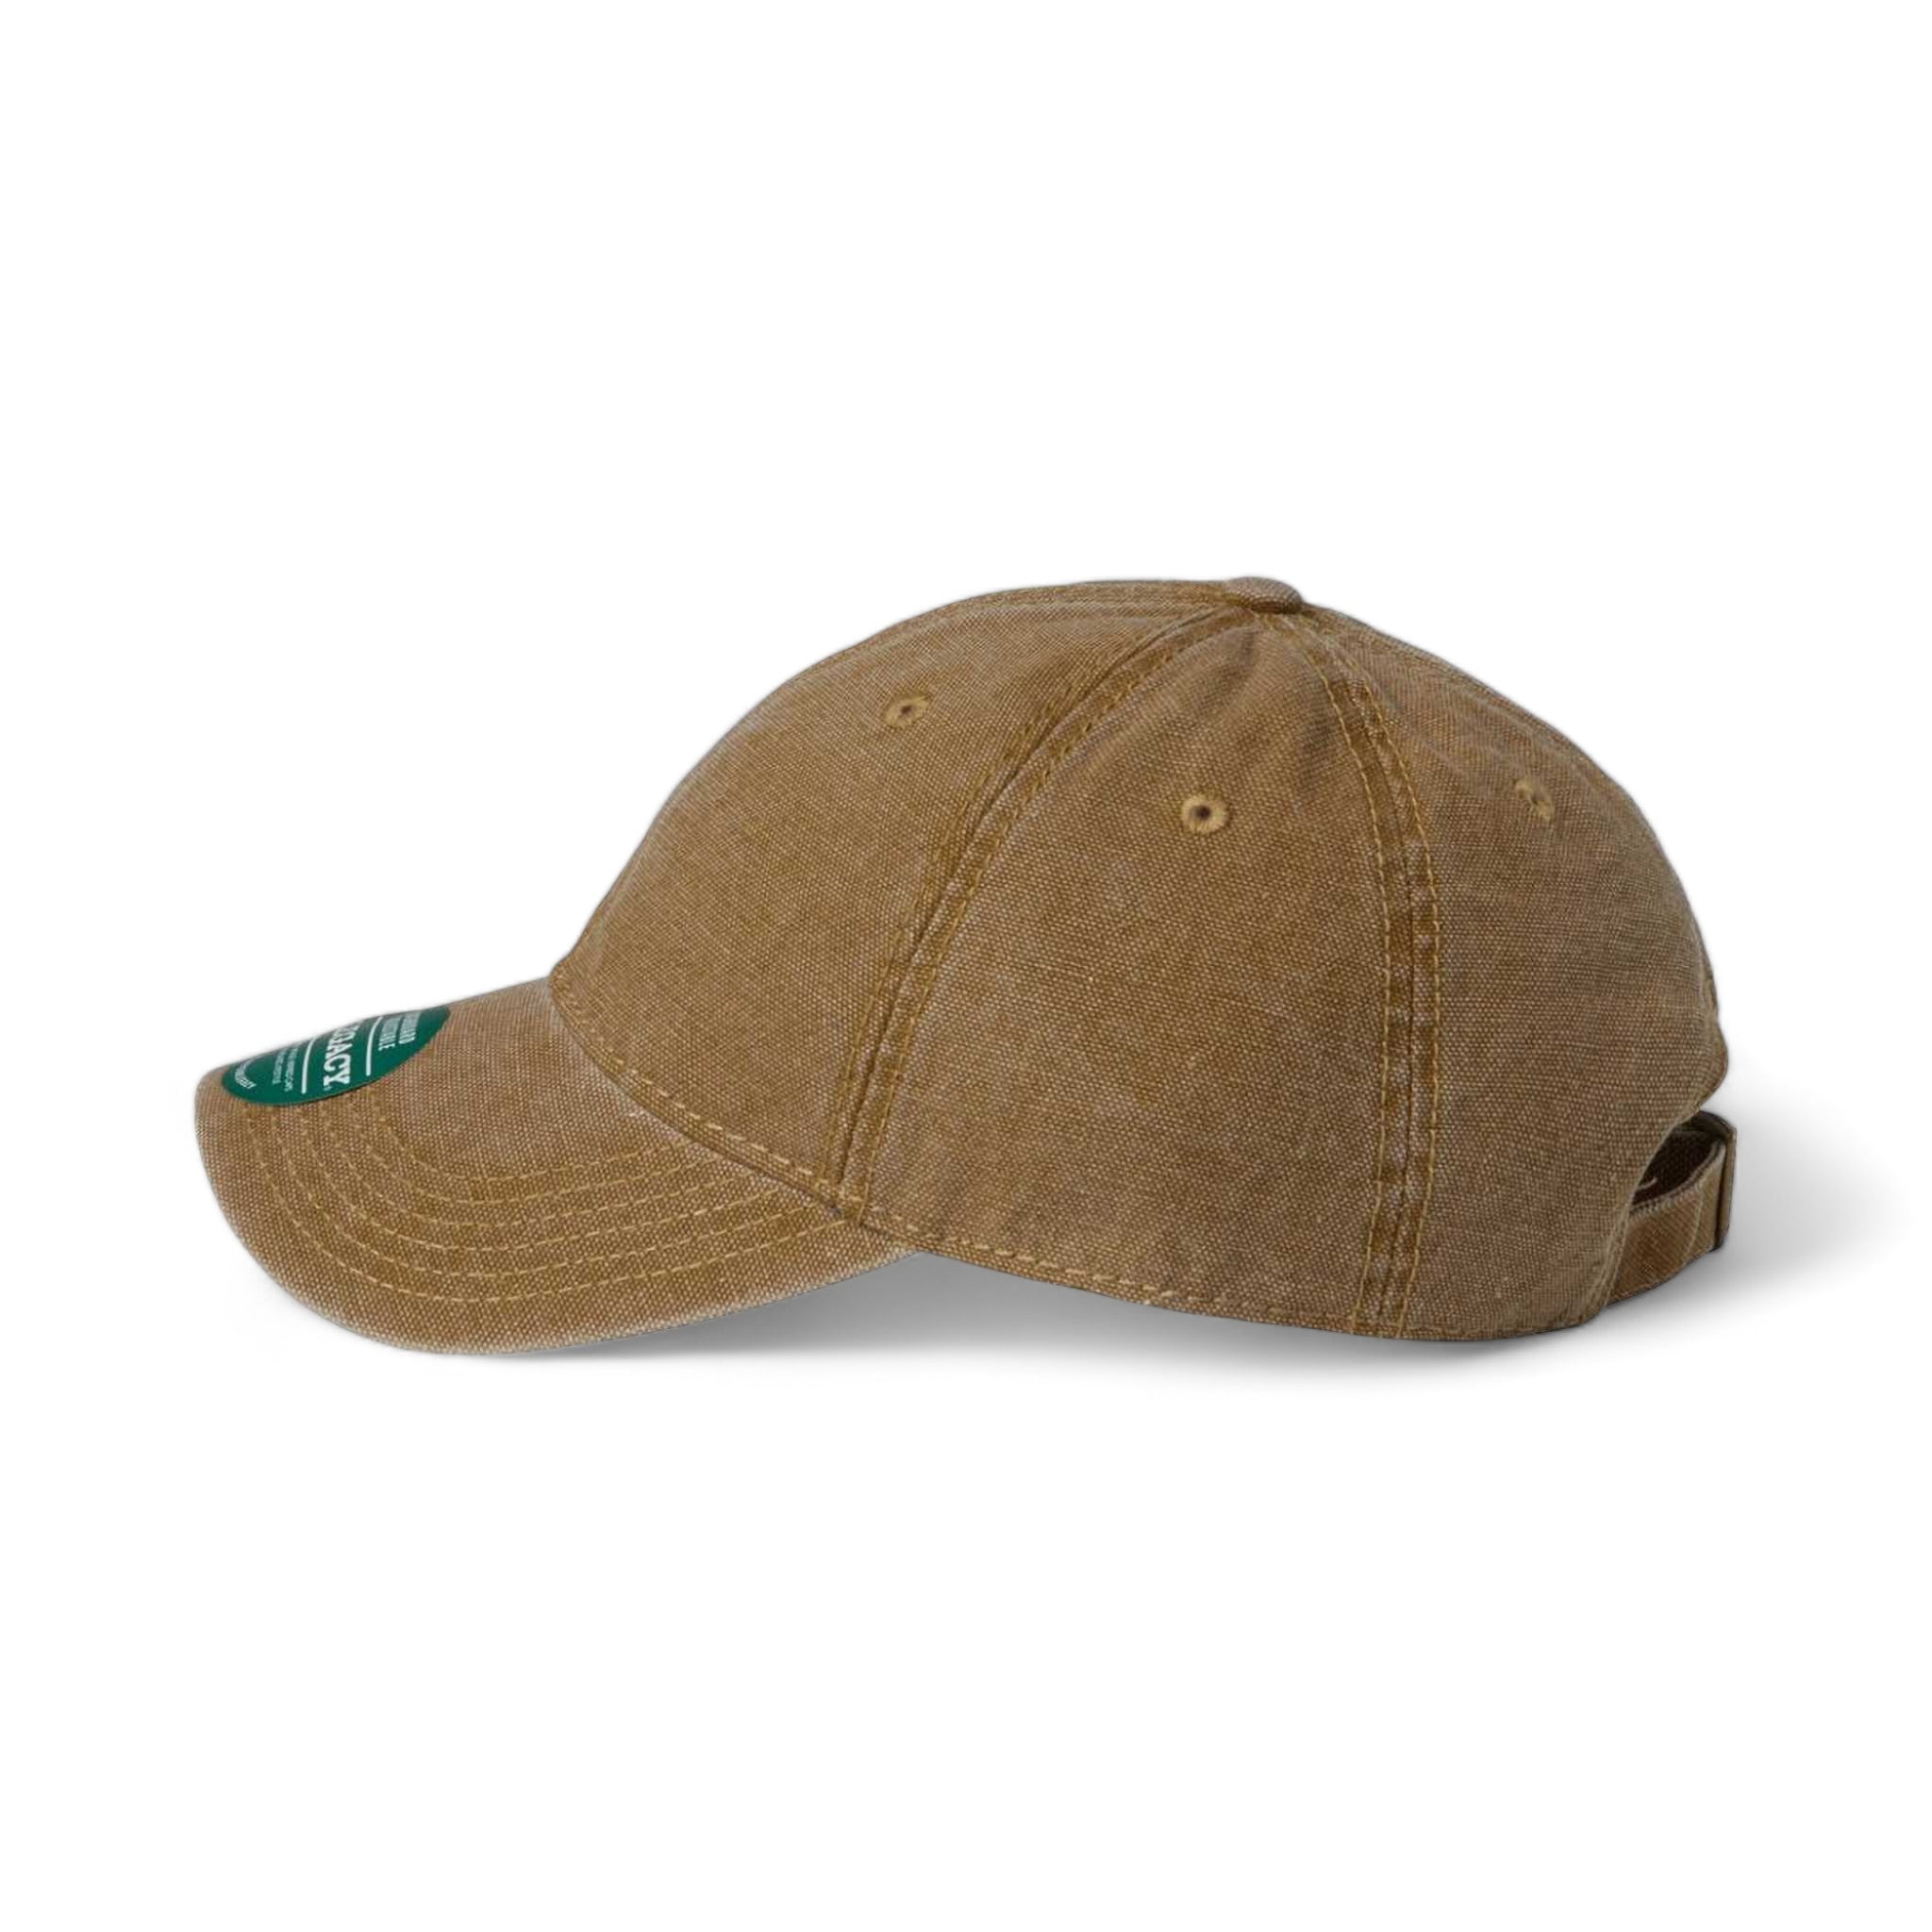 Side view of LEGACY DTAST custom hat in camel